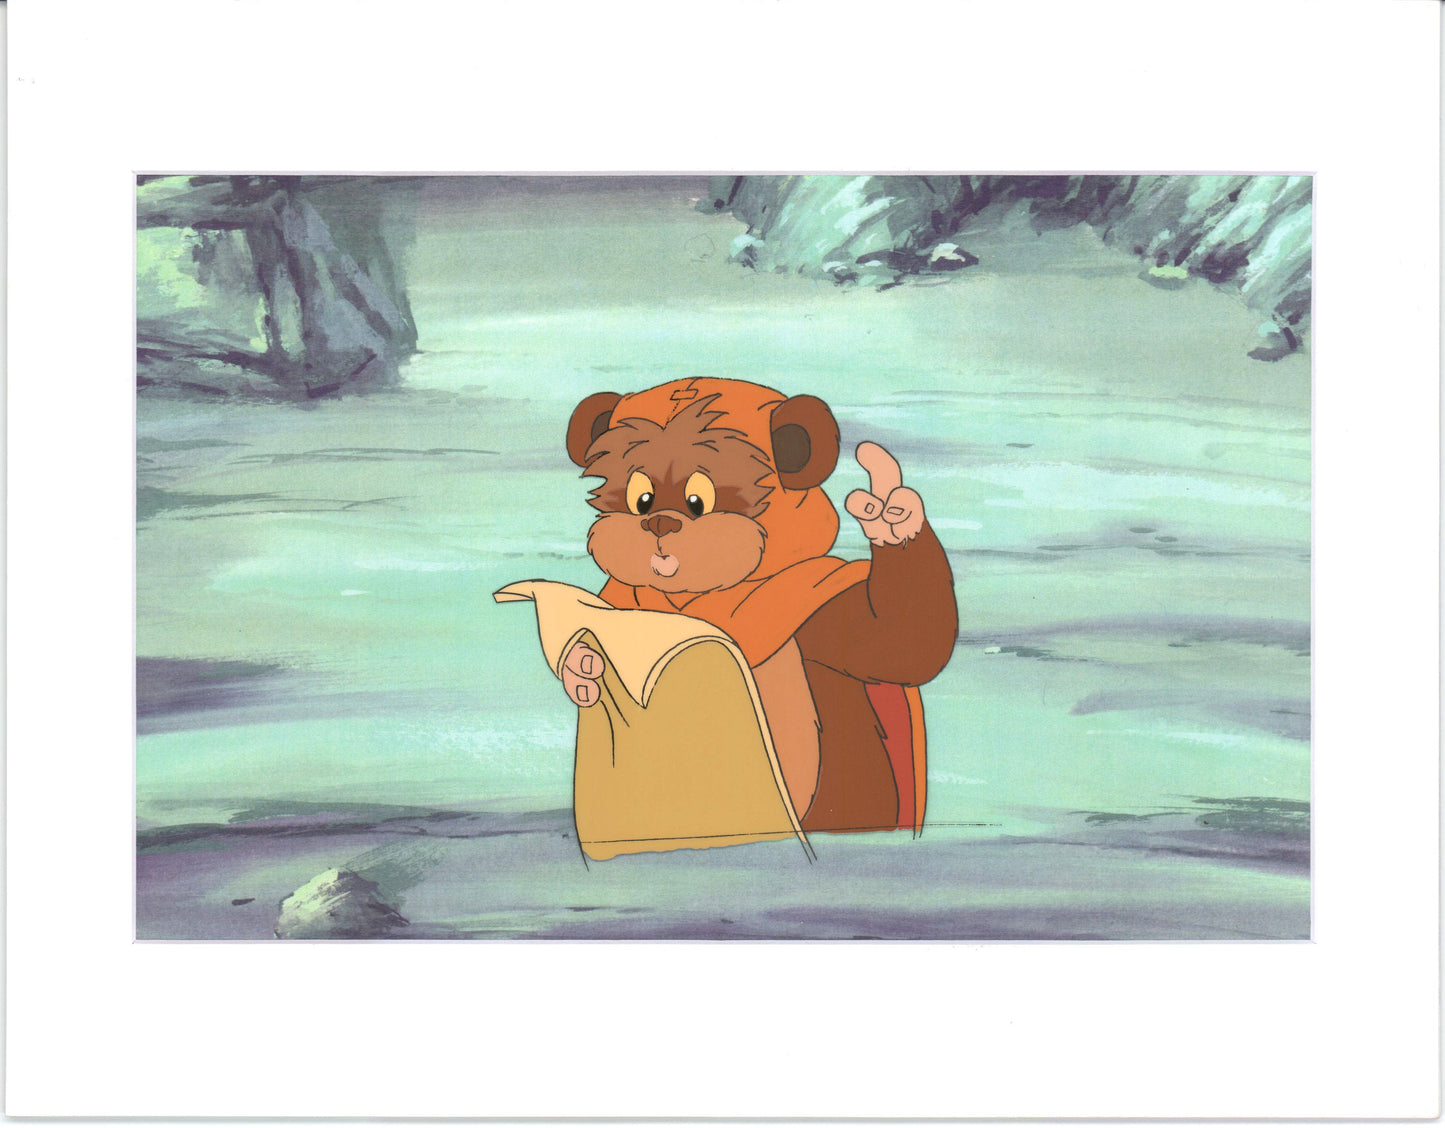 Star Wars: Ewoks Wicket from Season One Original Production Animation Cel and Drawing from Lucasfilm b5335